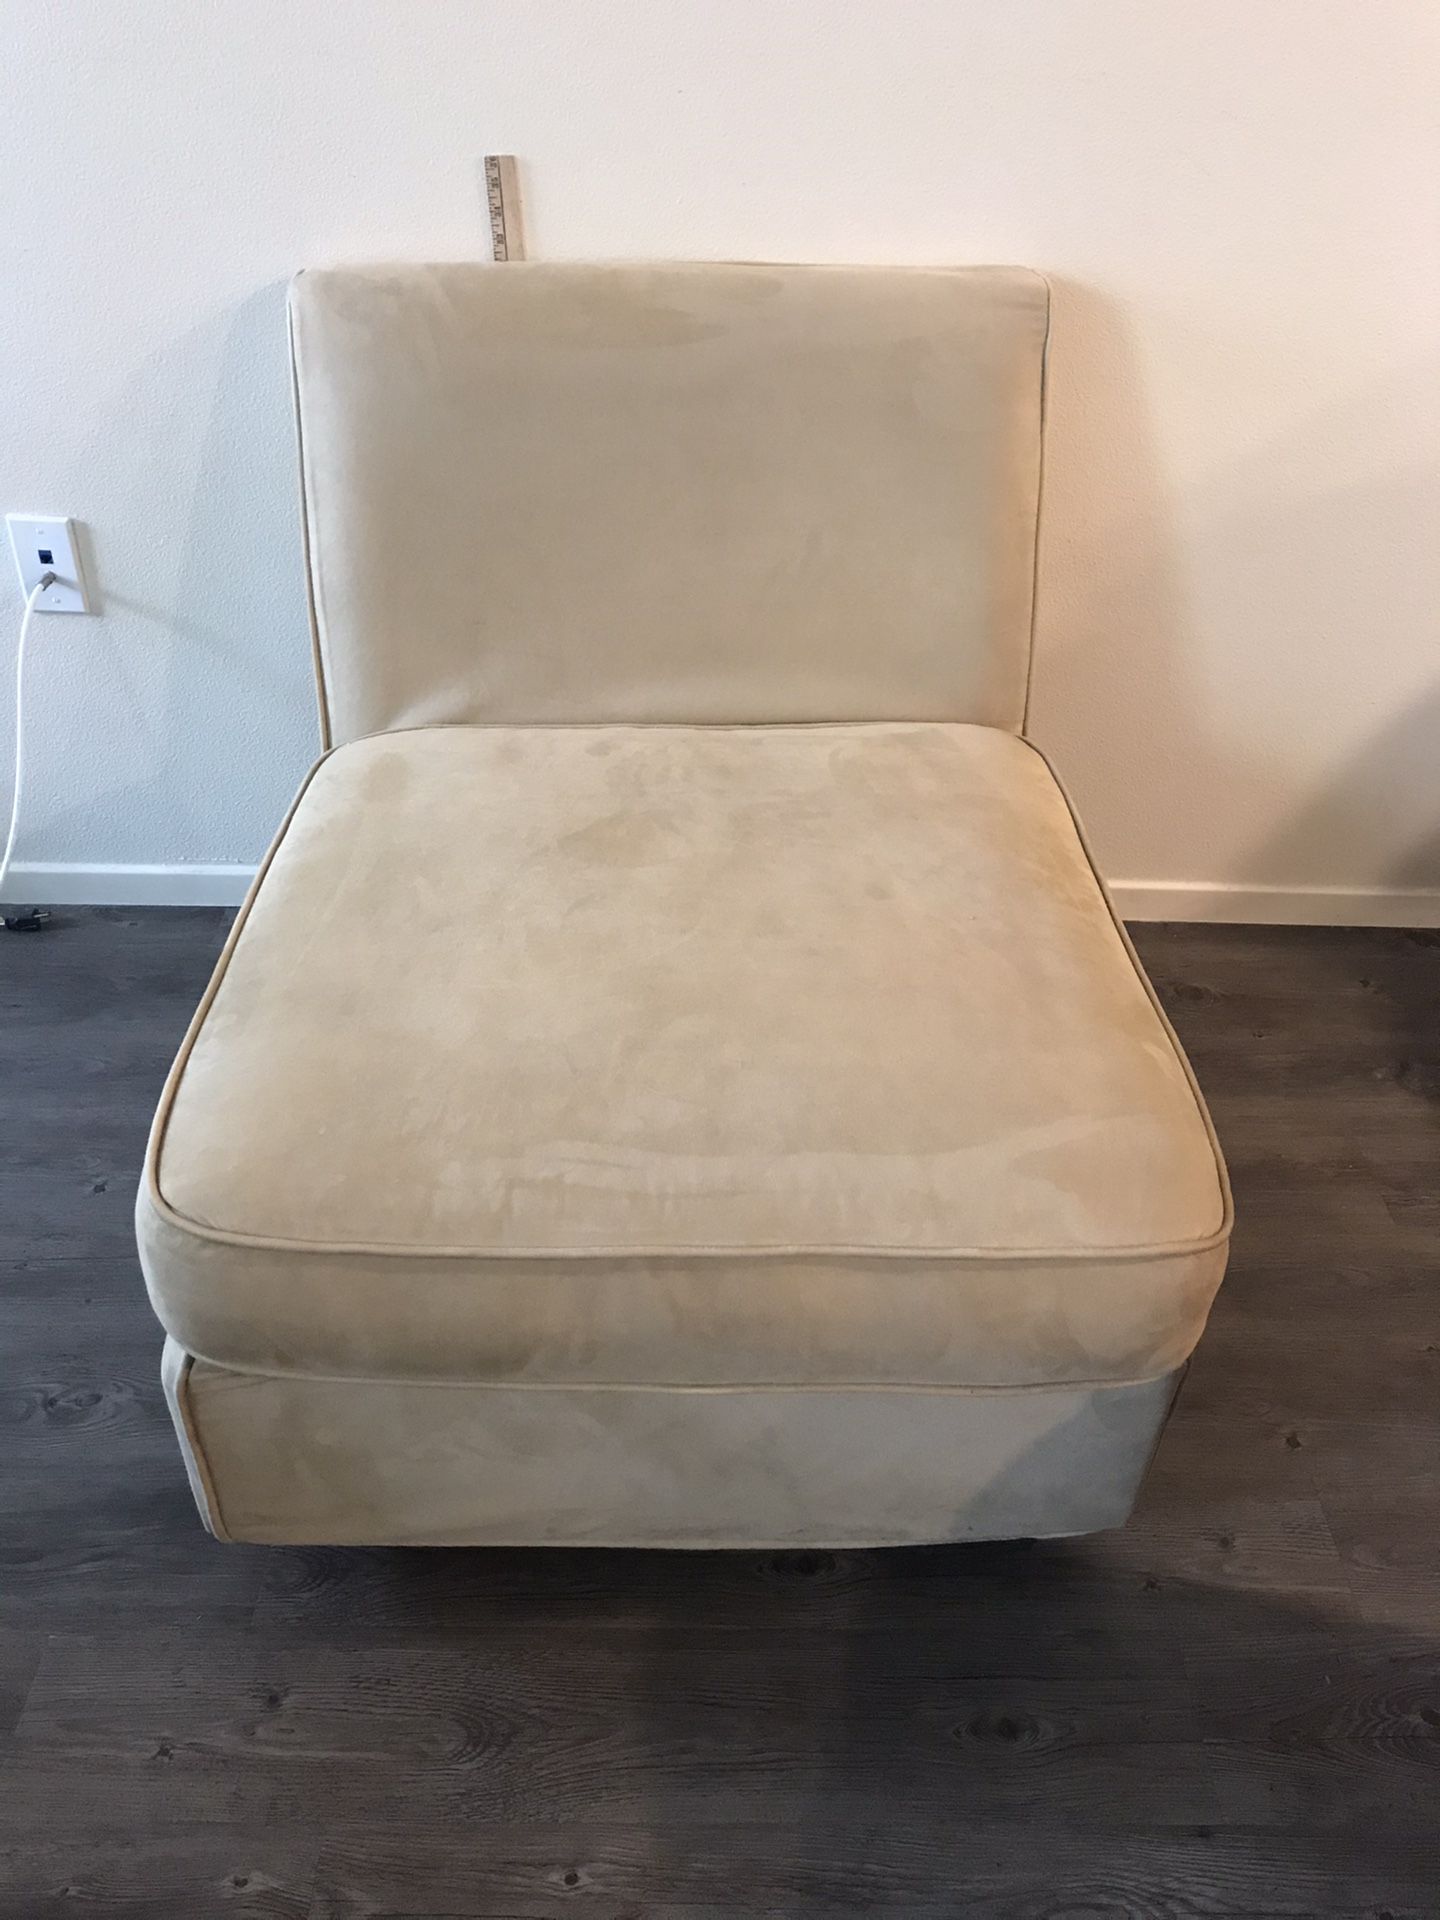 Pottery Barn living room ultra suede sofa chair